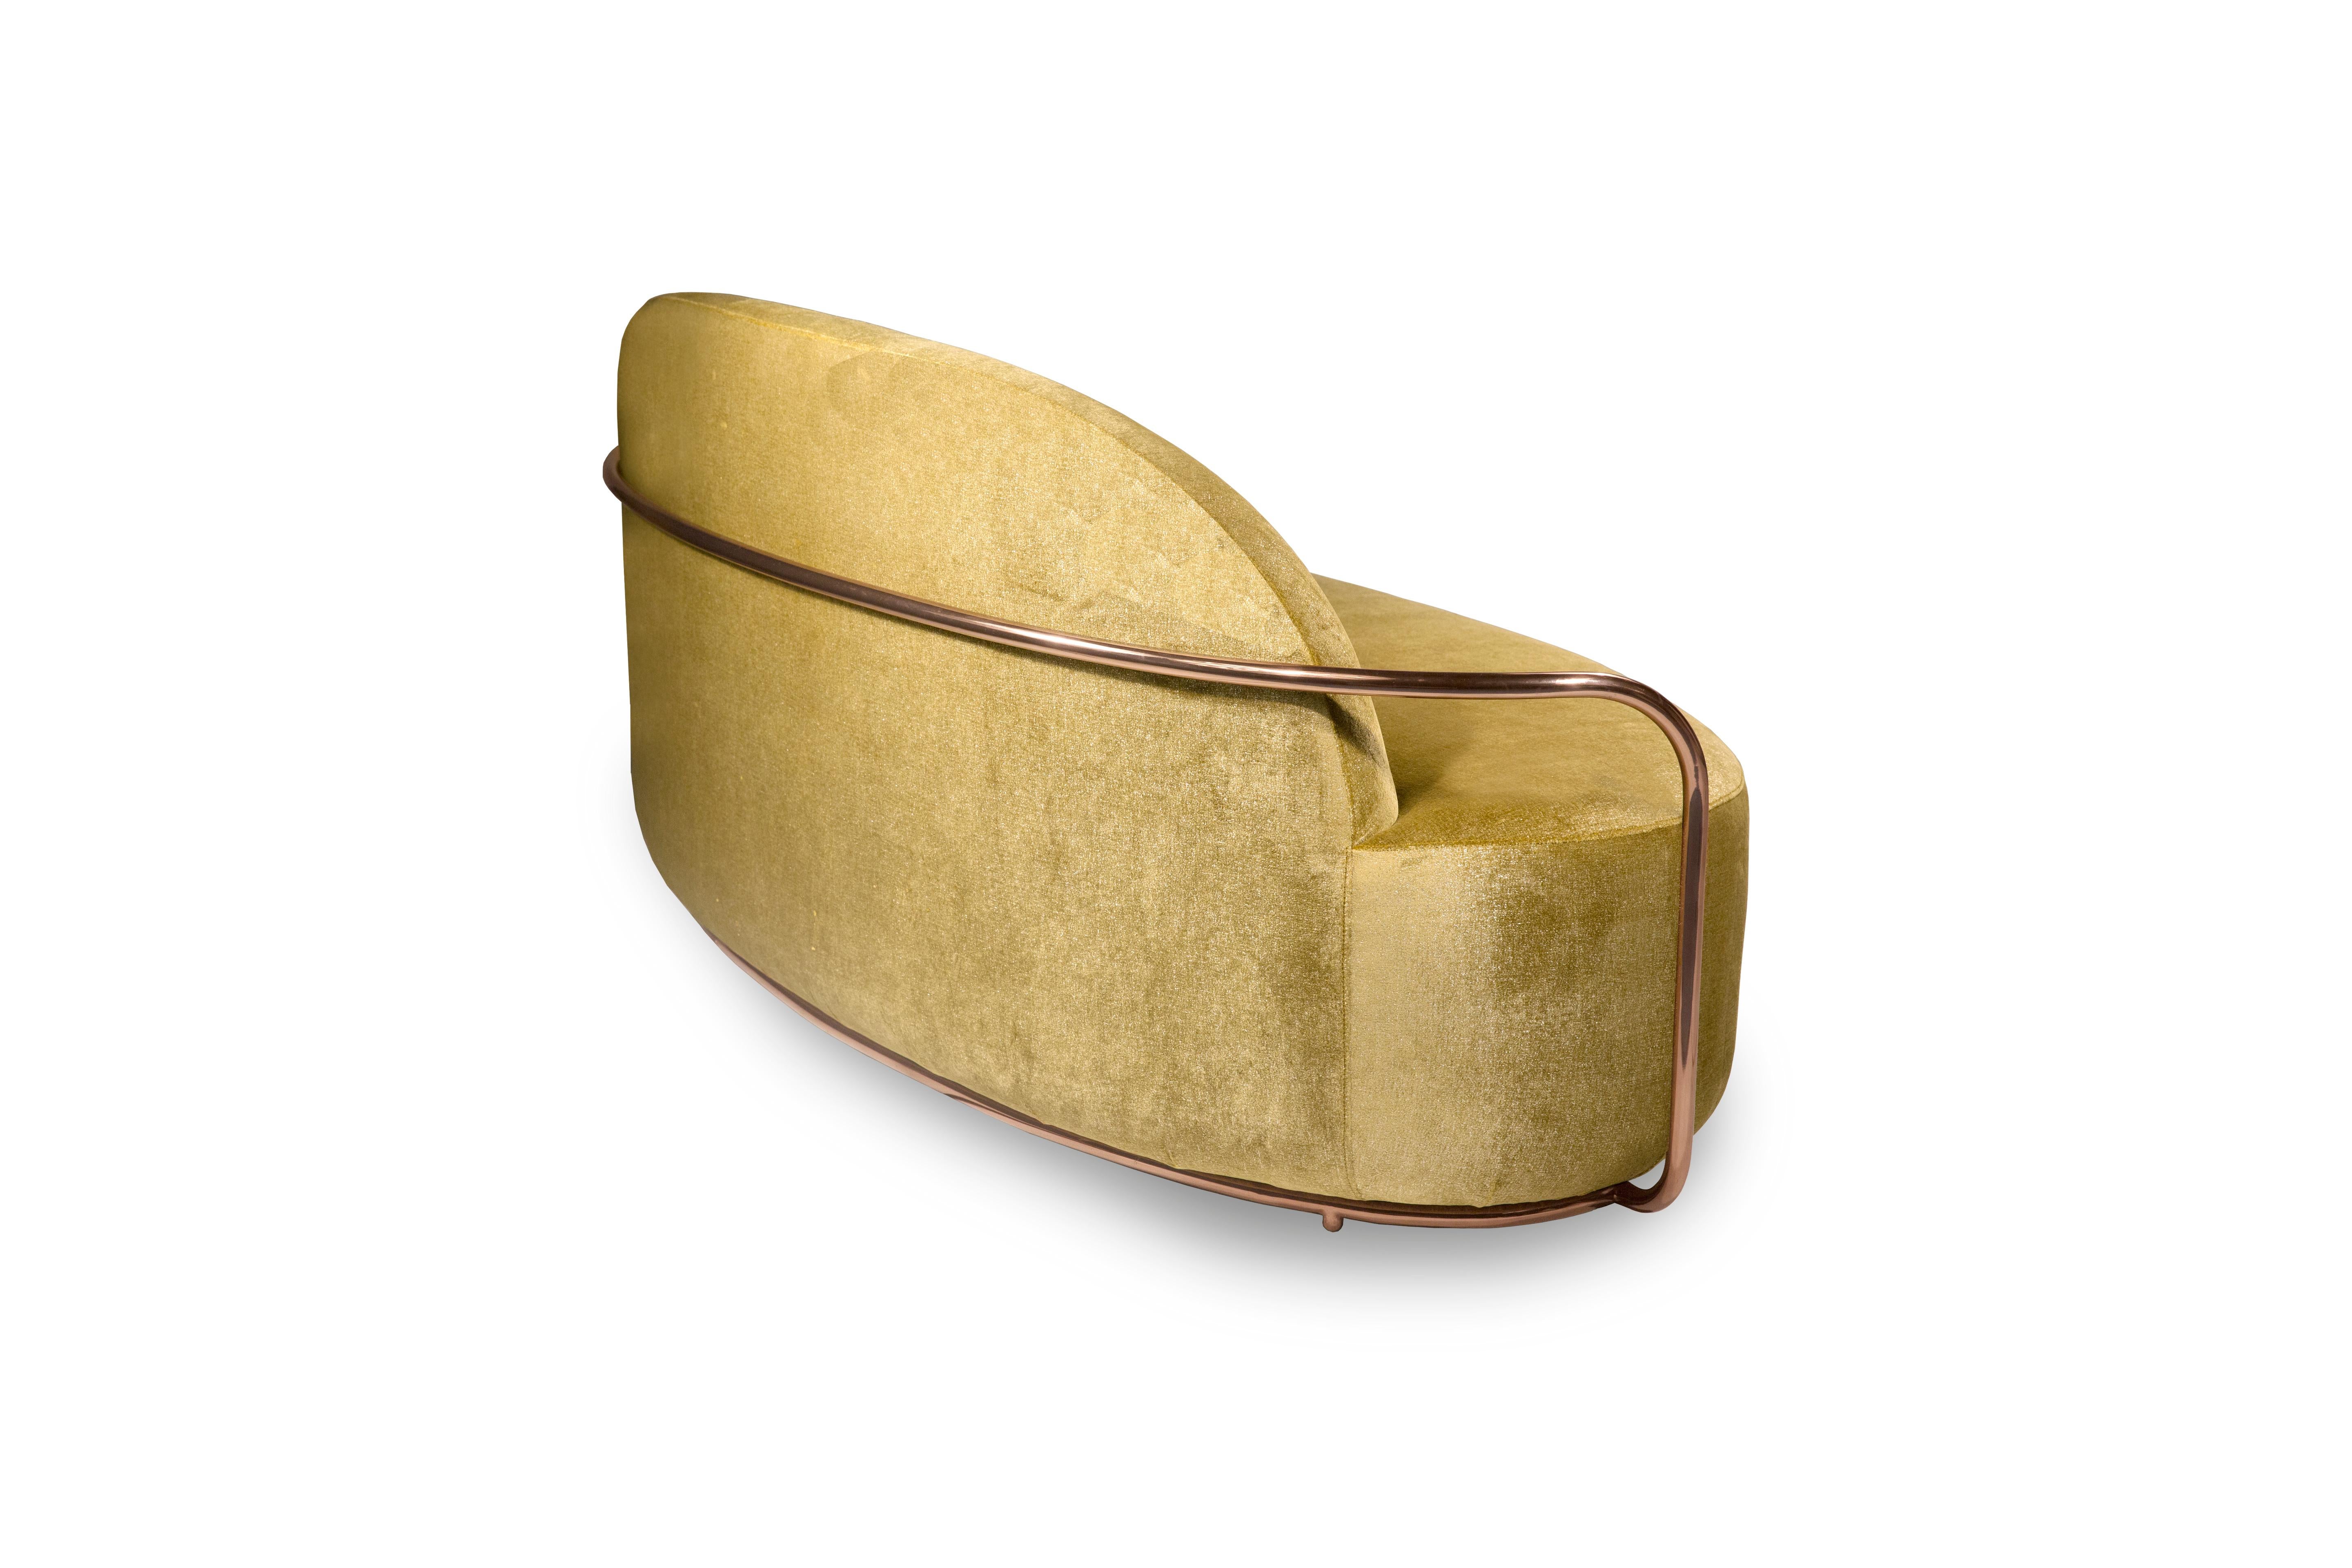 Orion 3 Seat Sofa with Gold Dedar Velvet and Rose Gold Arms by Nika Zupanc is a single-seat sofa with opulent gold fabric from Dedar Milano and rose gold metal arms. A statement piece!

Nika Zupanc, a strikingly renowned Slovenian designer, never